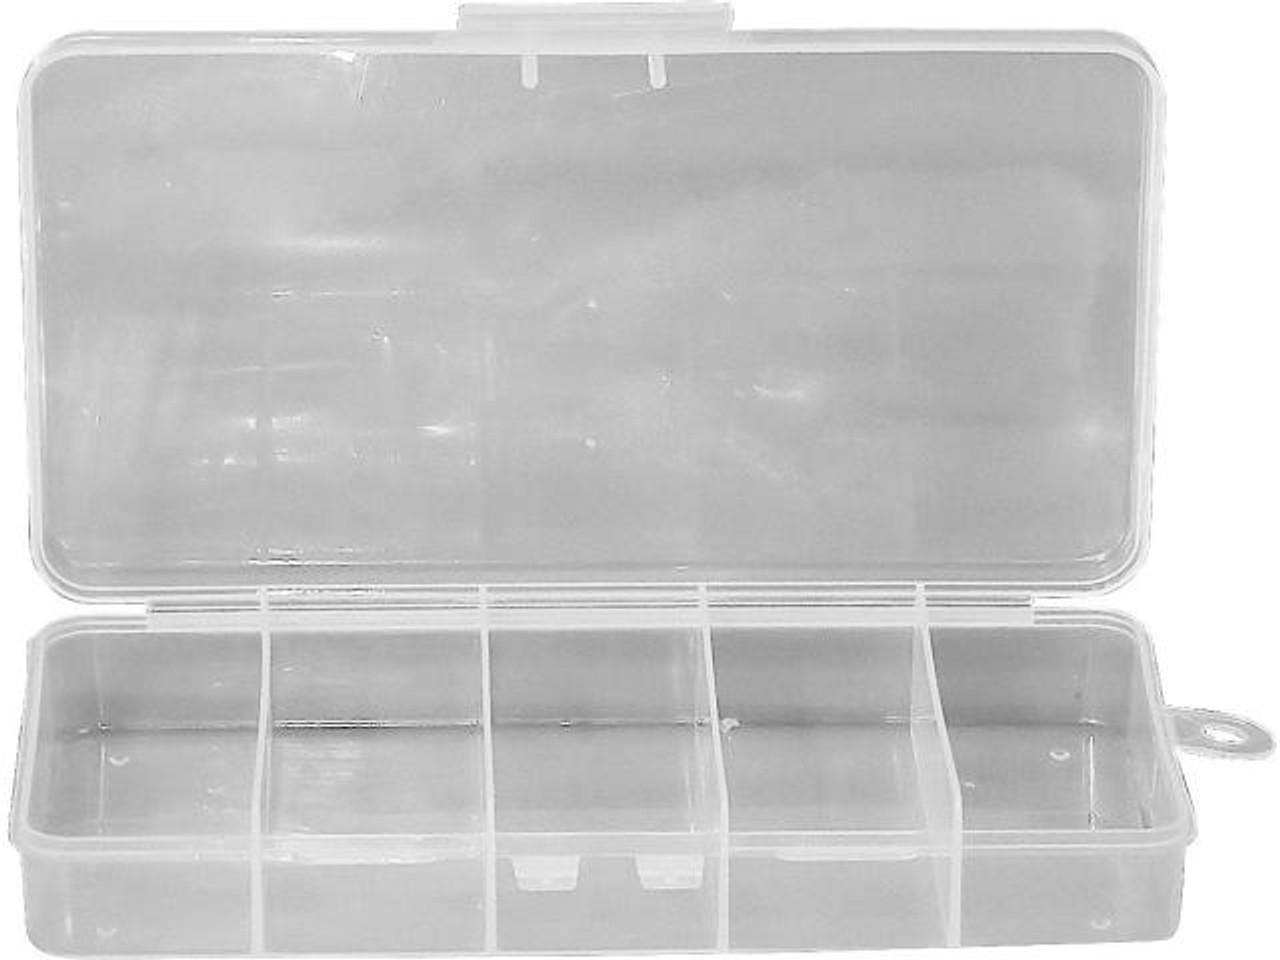 Organizers/ Storage for Jewelry Parts/ Tools